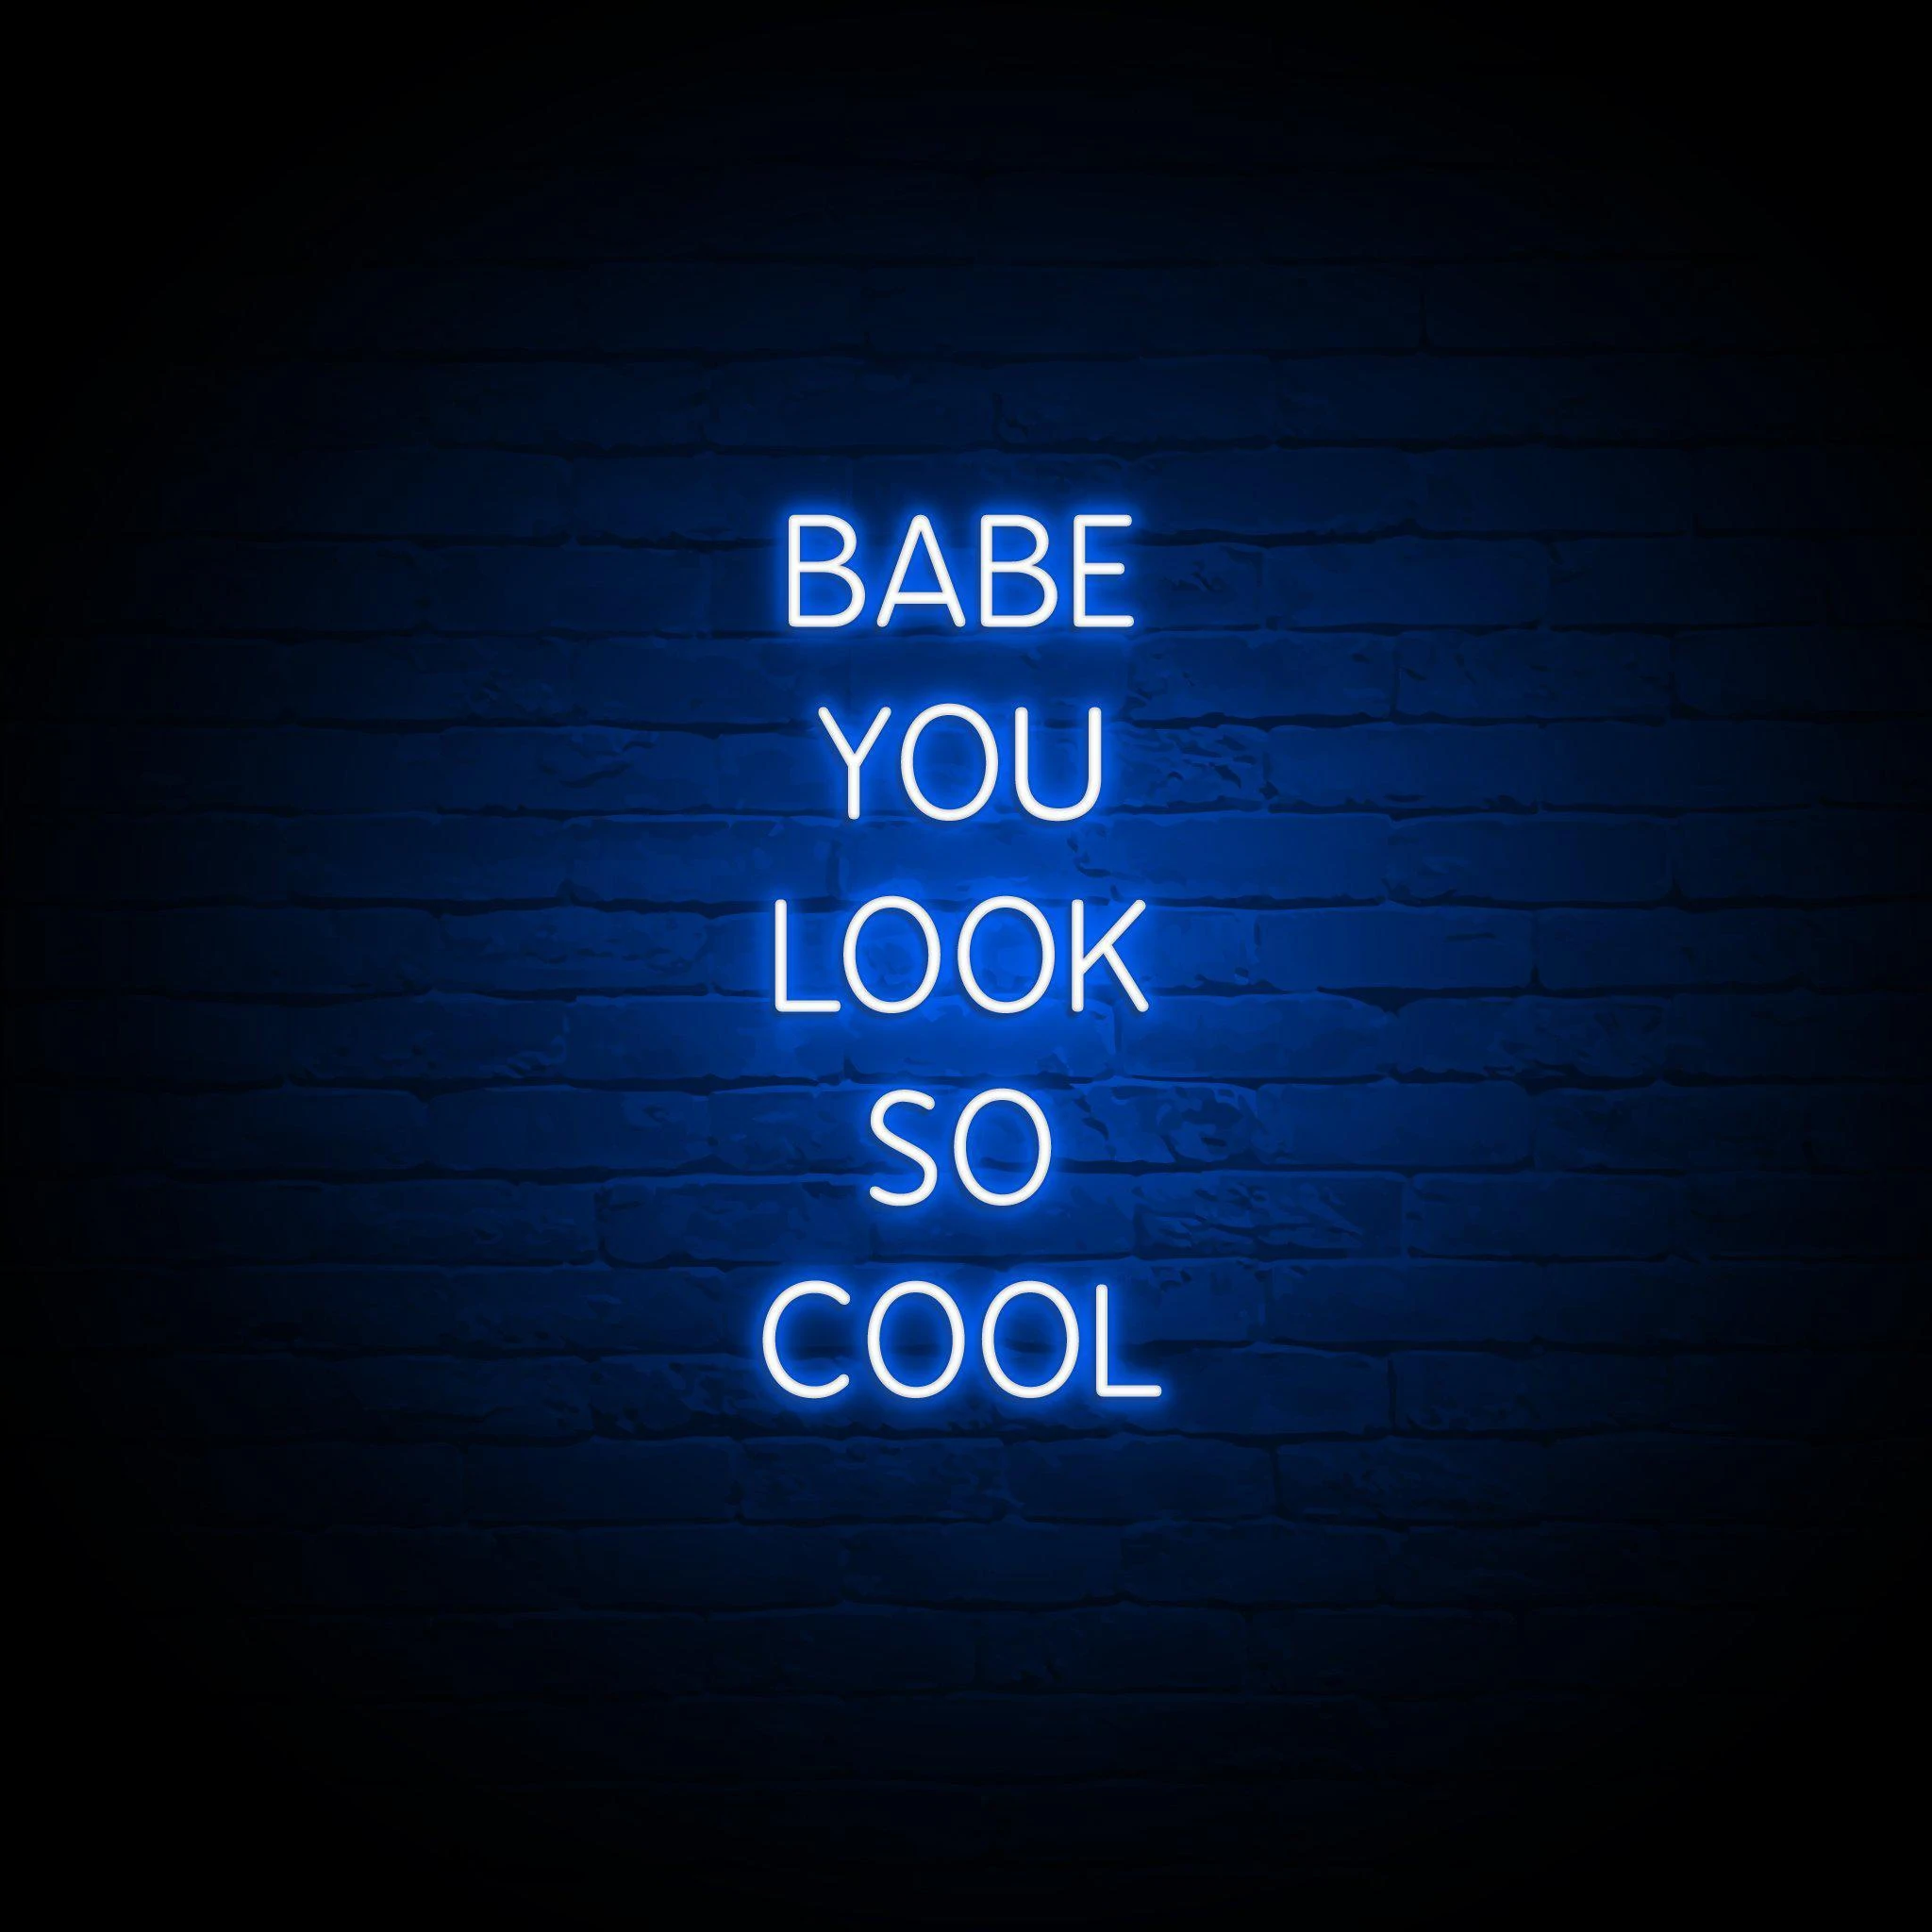 'BABE YOU LOOK SO COOL' NEON SIGN - NeonFerry